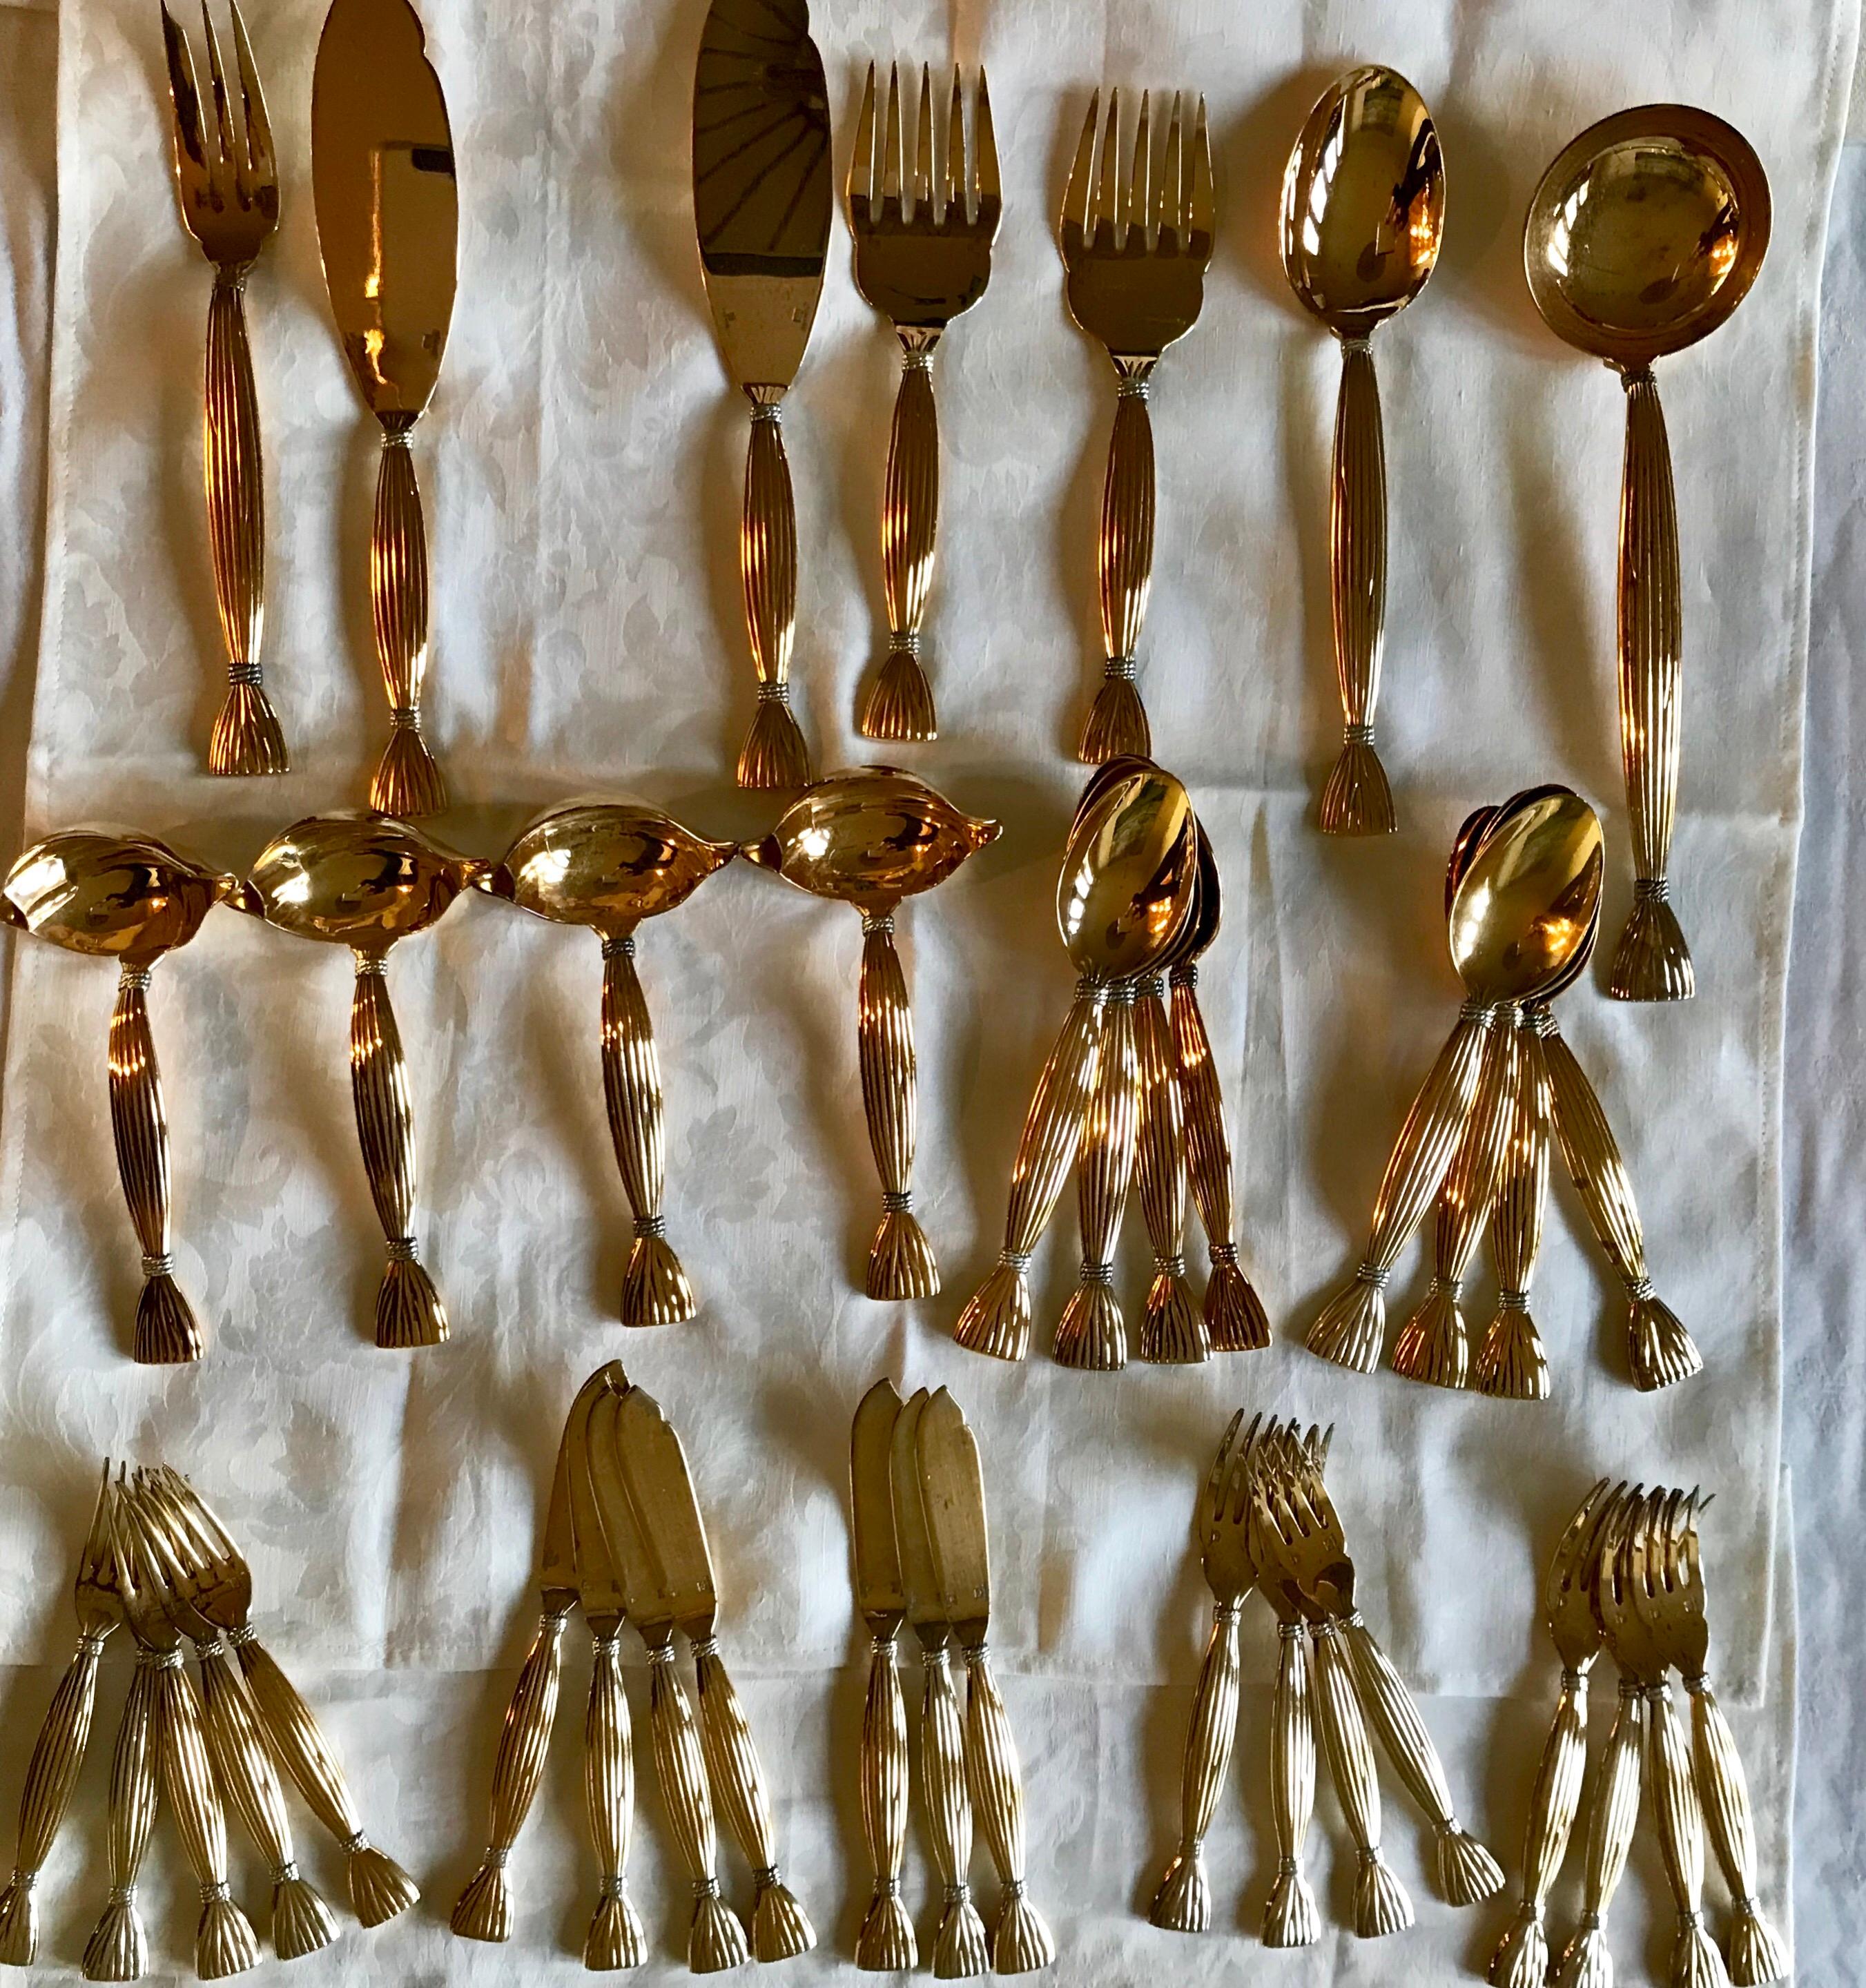 French Vintage Hermès “Moisson” Vermeil Cutlery, 67 Pieces Sold Together